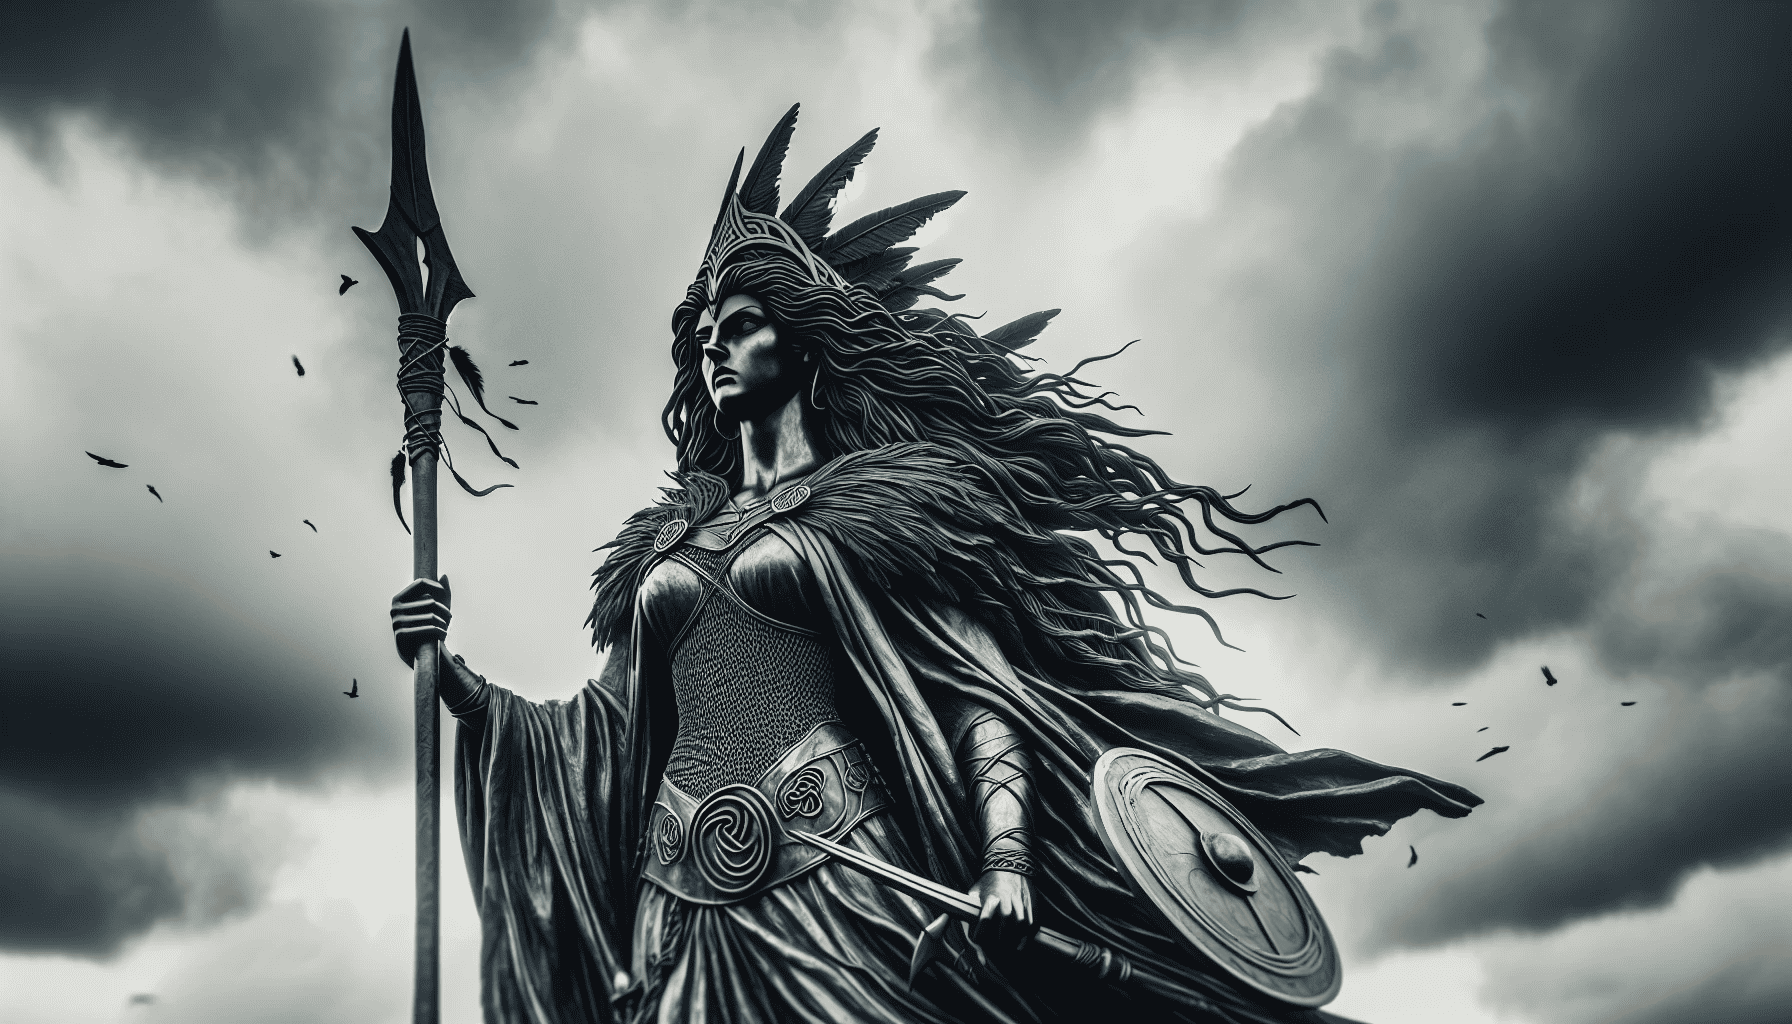 Illustration of the Morrigan, a powerful war and sovereignty goddess in Celtic mythology